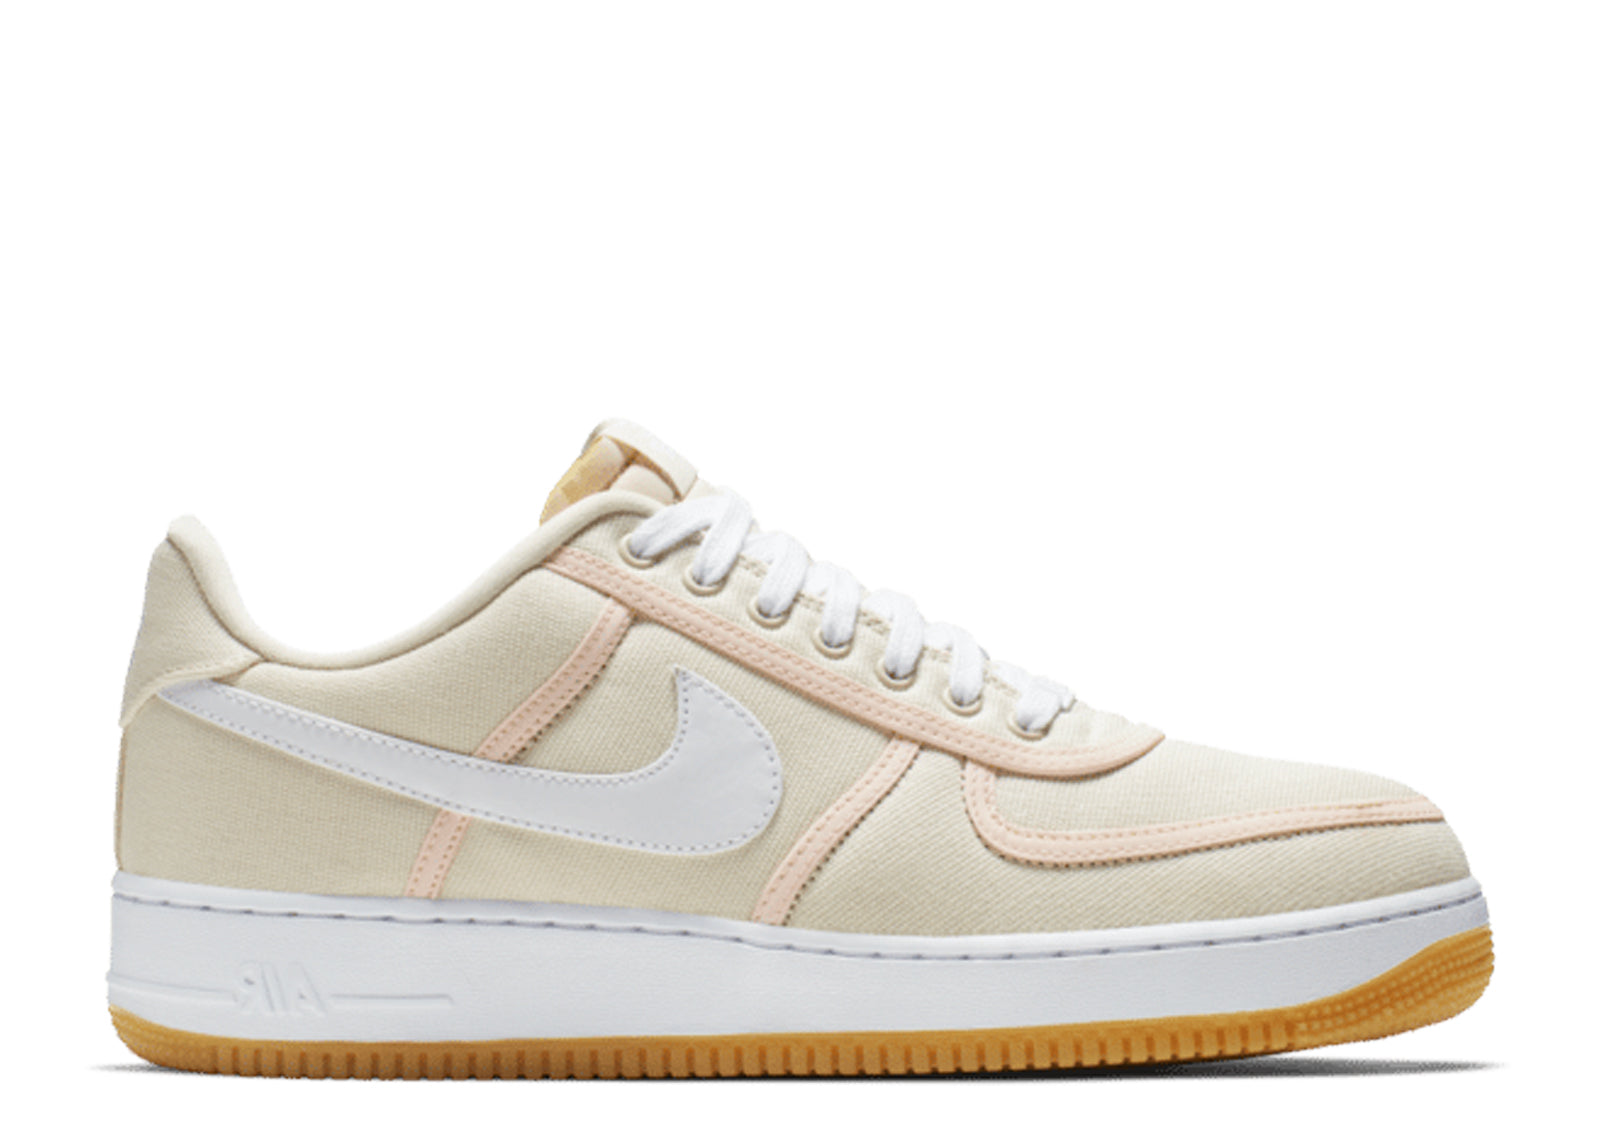 Second Chance - free Nike Air Force 1 '07 Low Premium Light Cream Gum - 36,5 | NEW